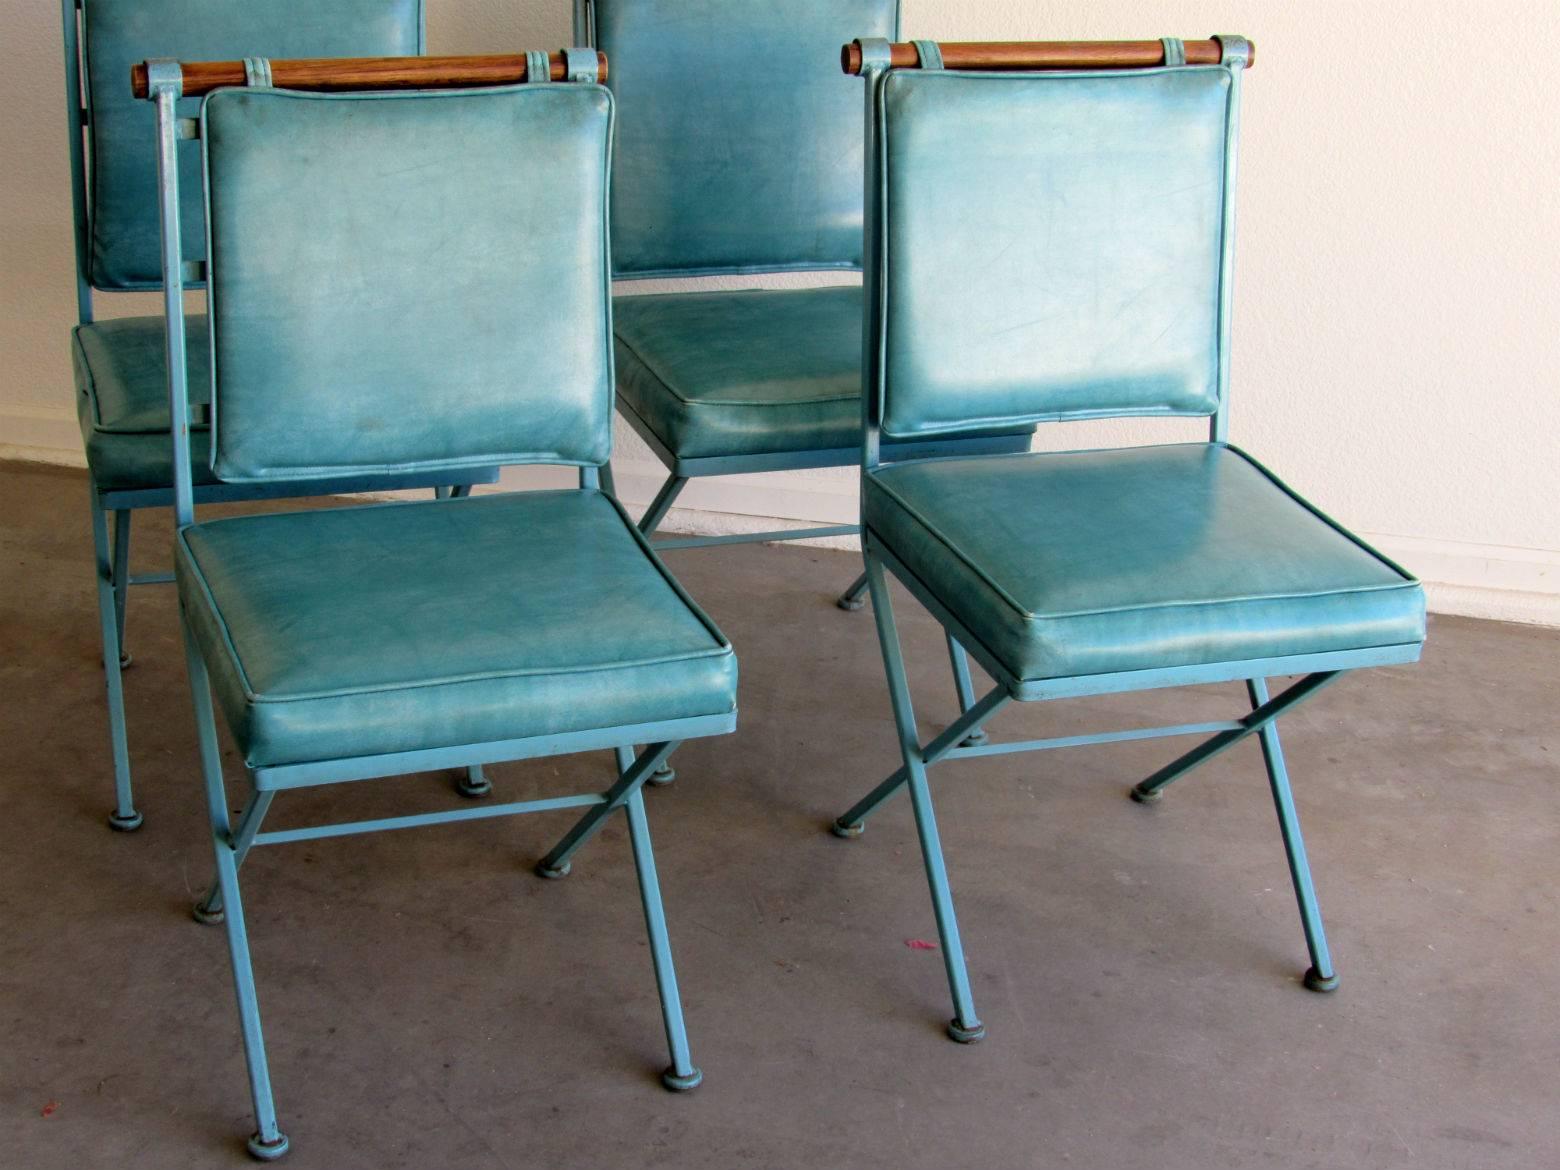 Set of four modernist campaign dining chairs designed by Cleo Baldon for Inca Products - Santa Fe Springs, Ca.  All original vintage iron and teal blue naugahyde upholstery with beautifully aged patina color - circa 1960s. 